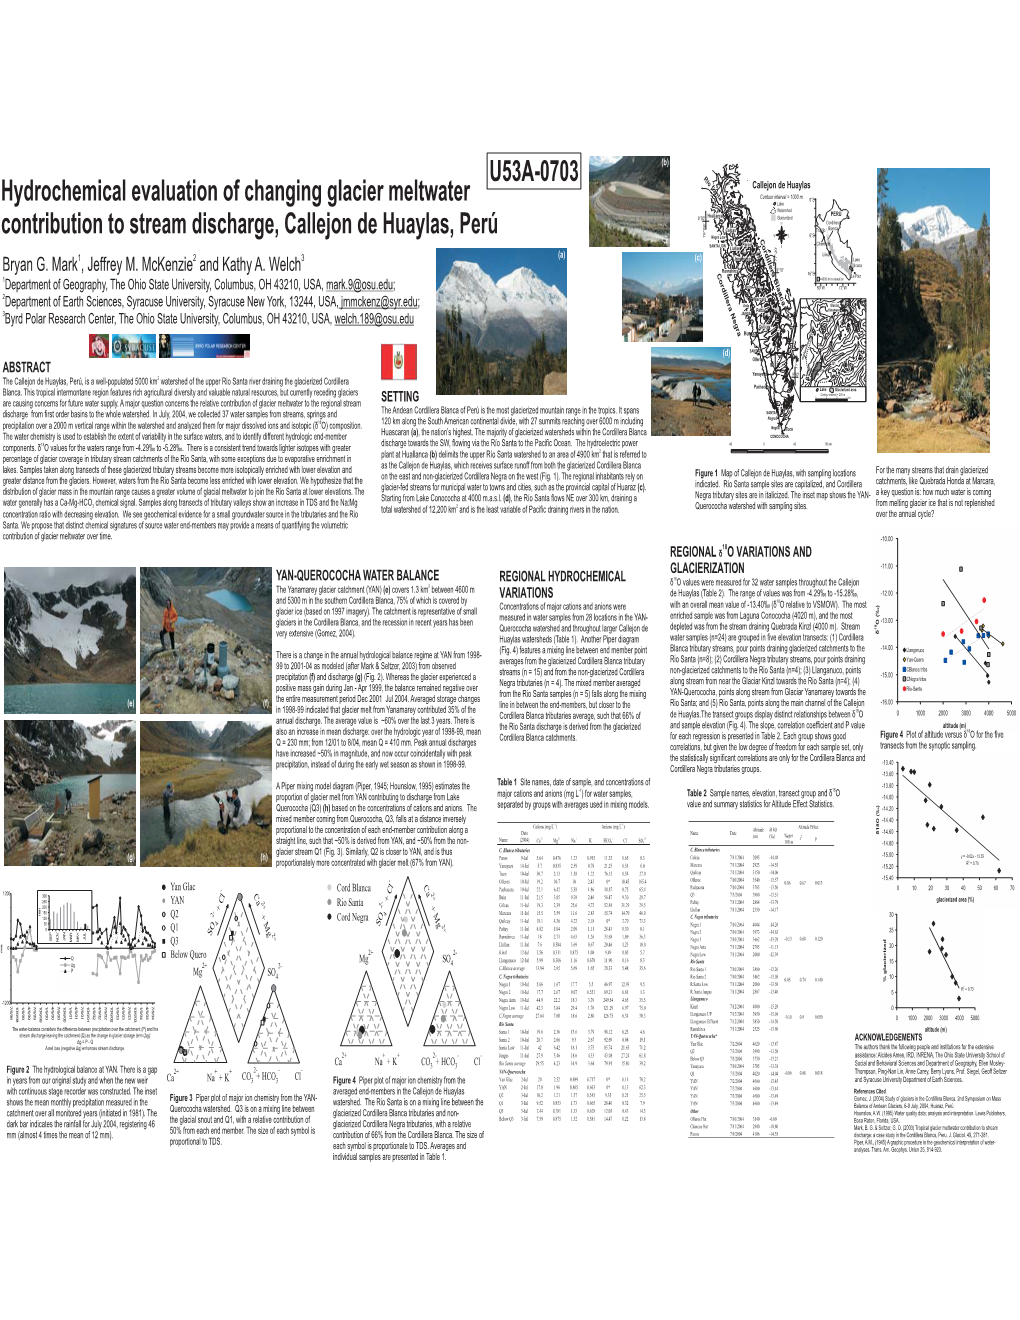 Hydrochemical Evaluation of Changing Glacier Meltwater Contribution To